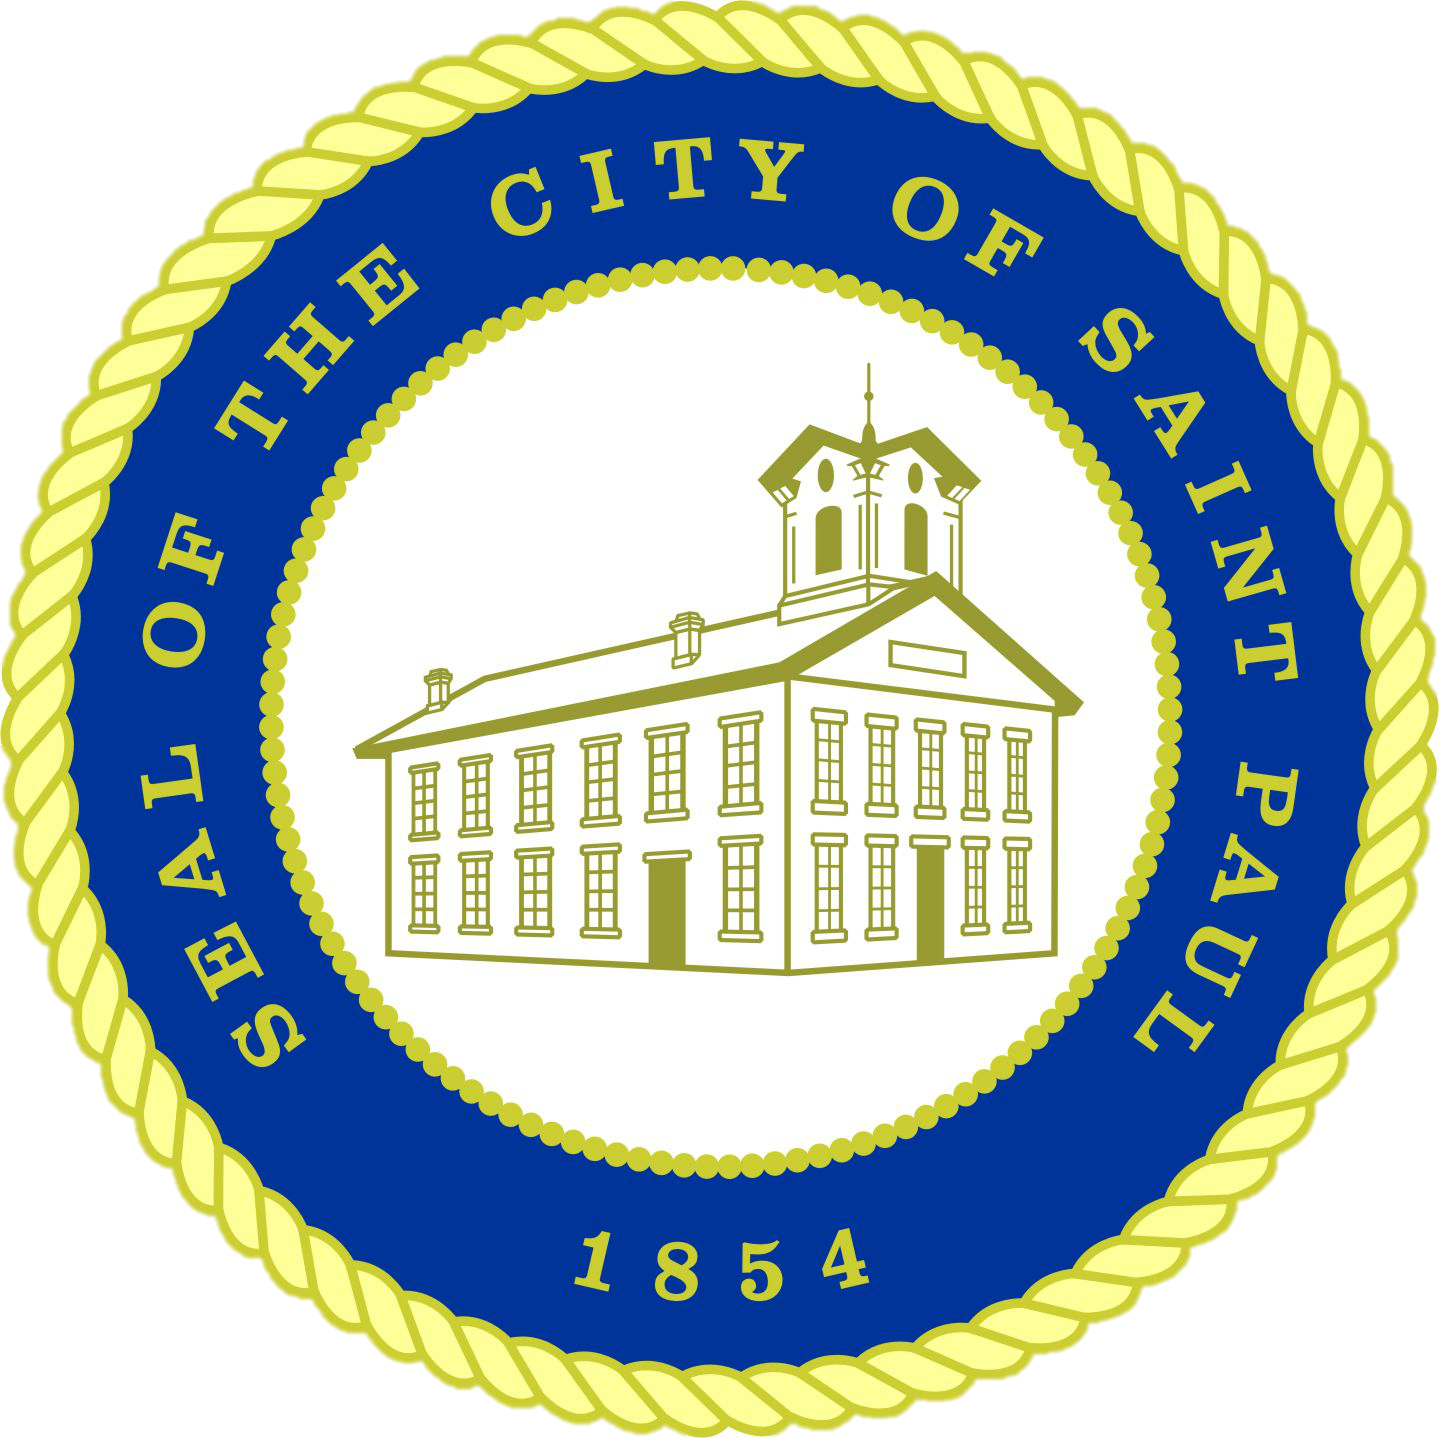 image of city seal